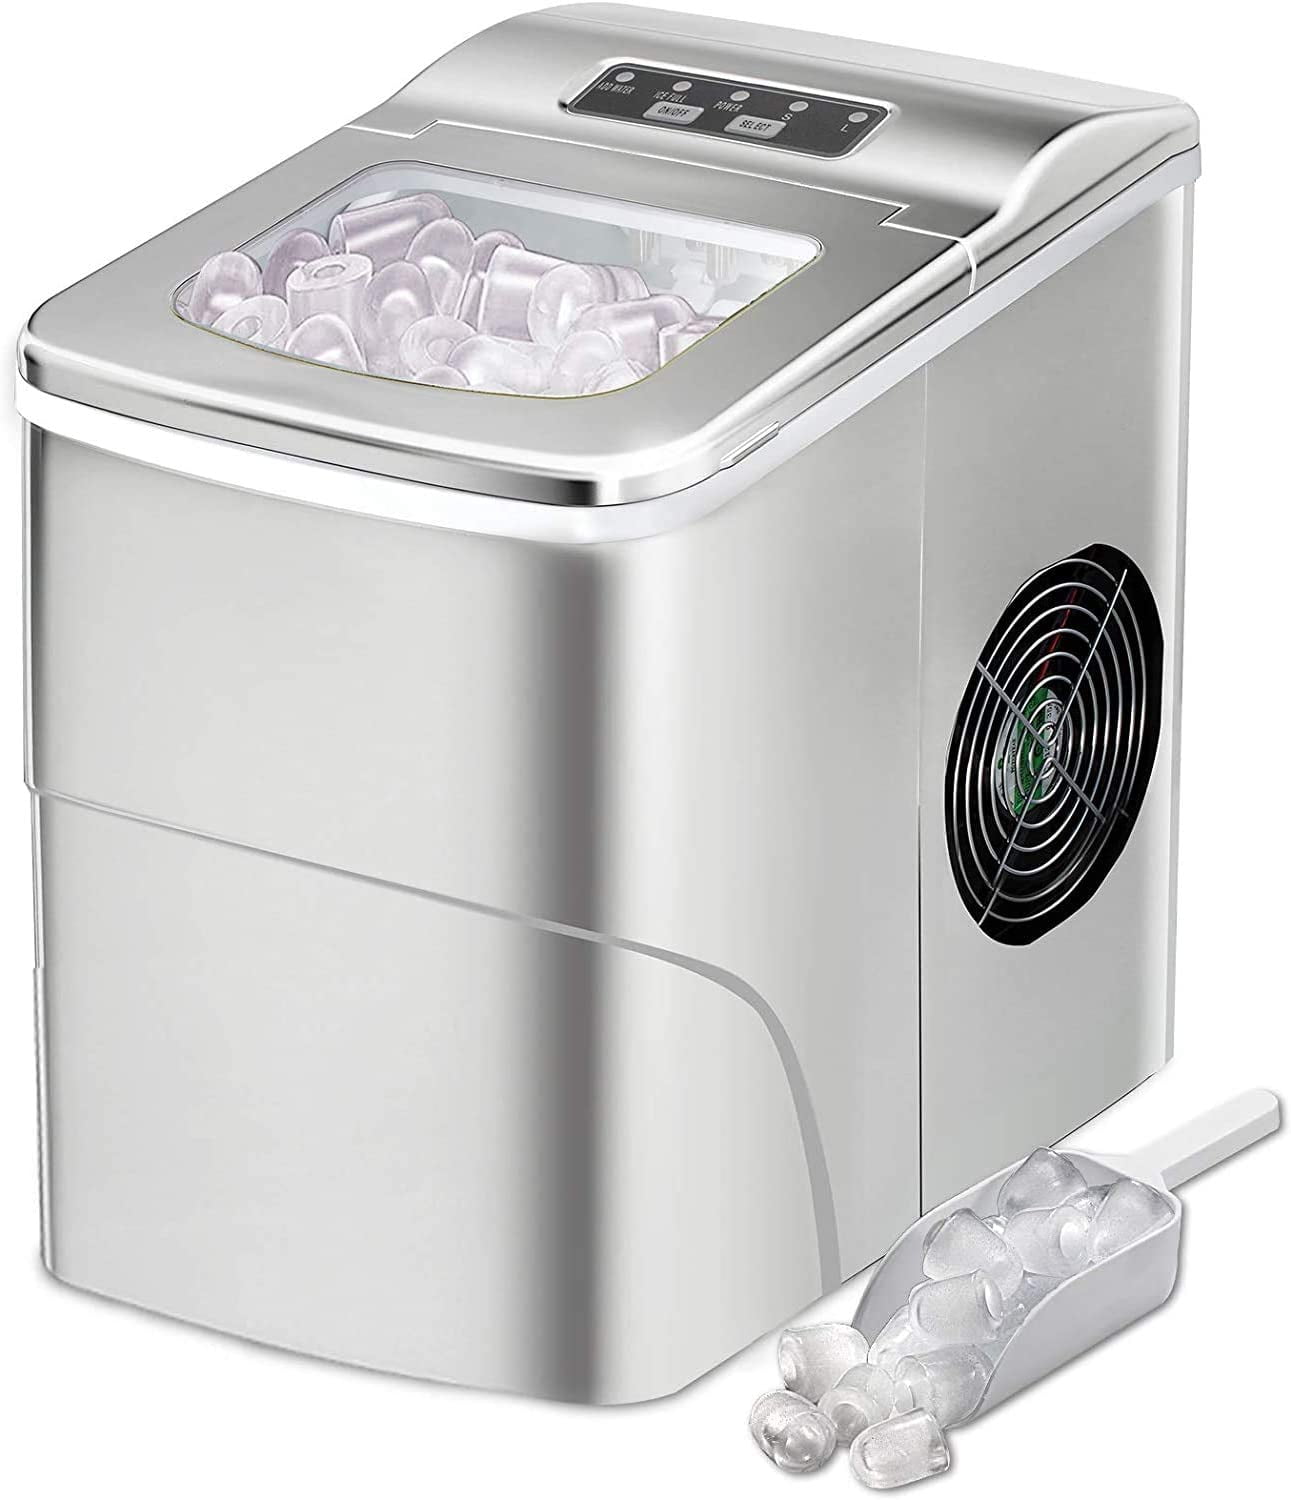 AGLucky automatic portable ice maker review 